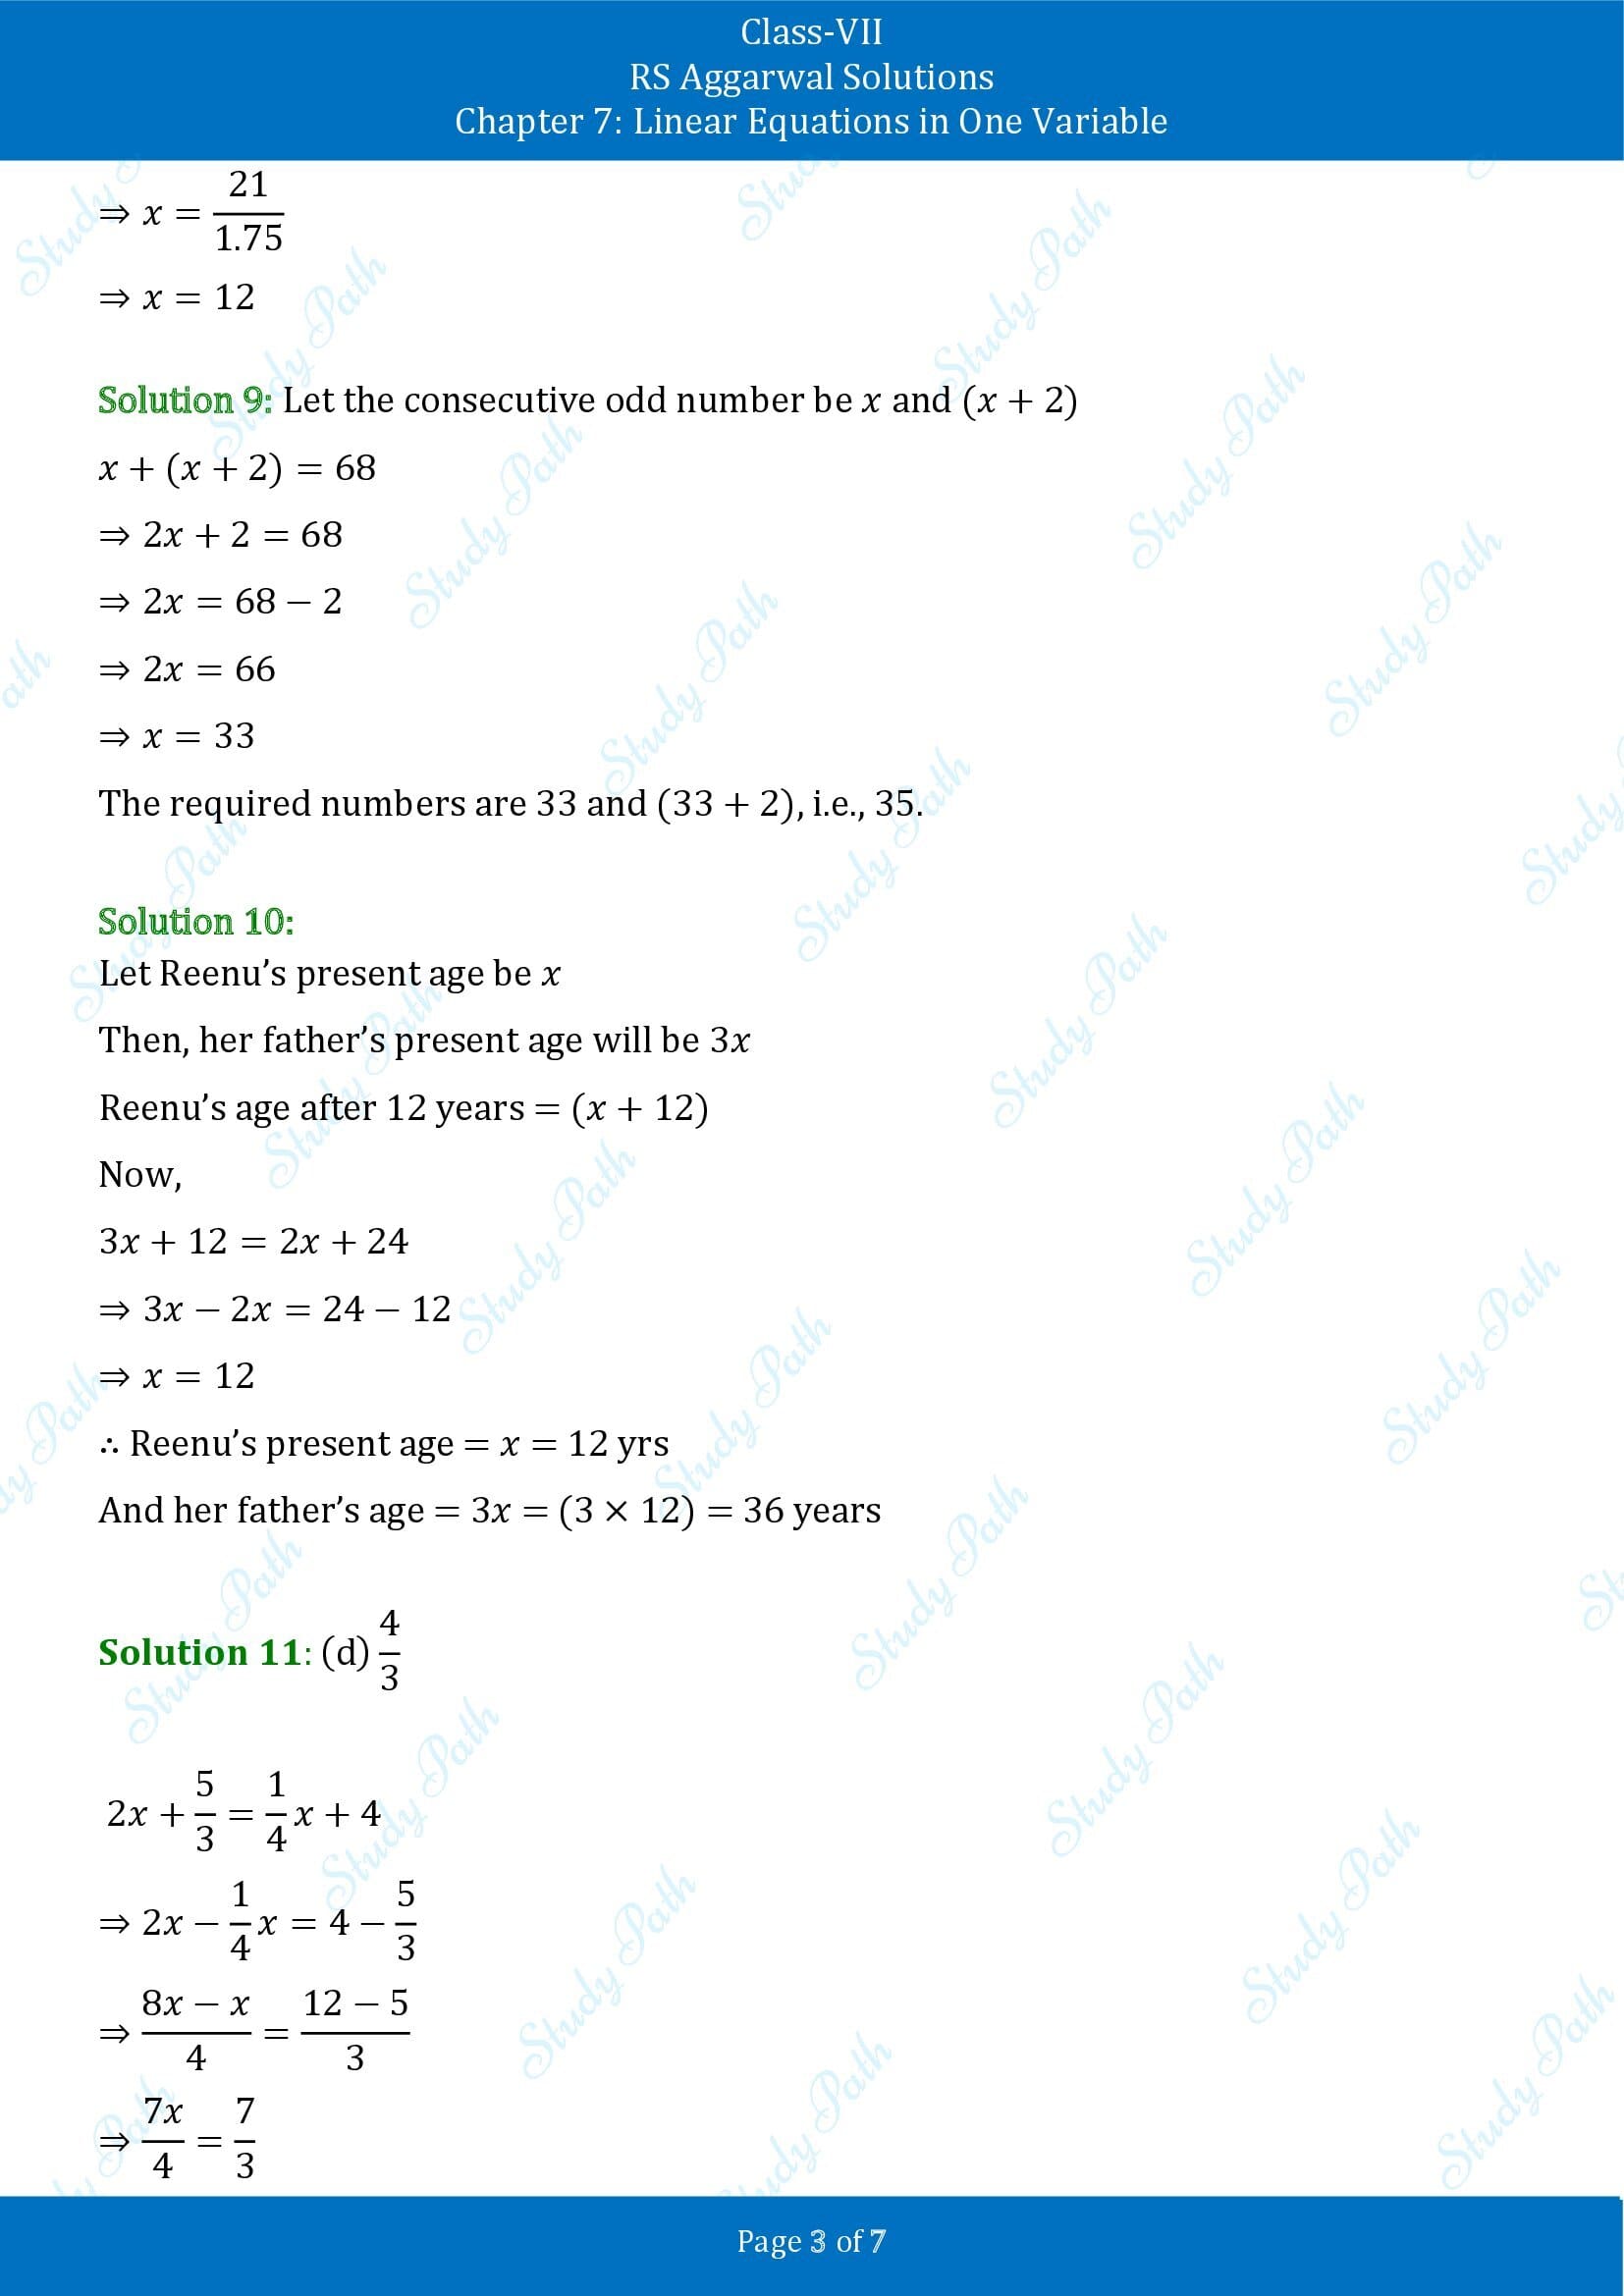 RS Aggarwal Solutions Class 7 Chapter 7 Linear Equations in One Variable Test Paper 00003